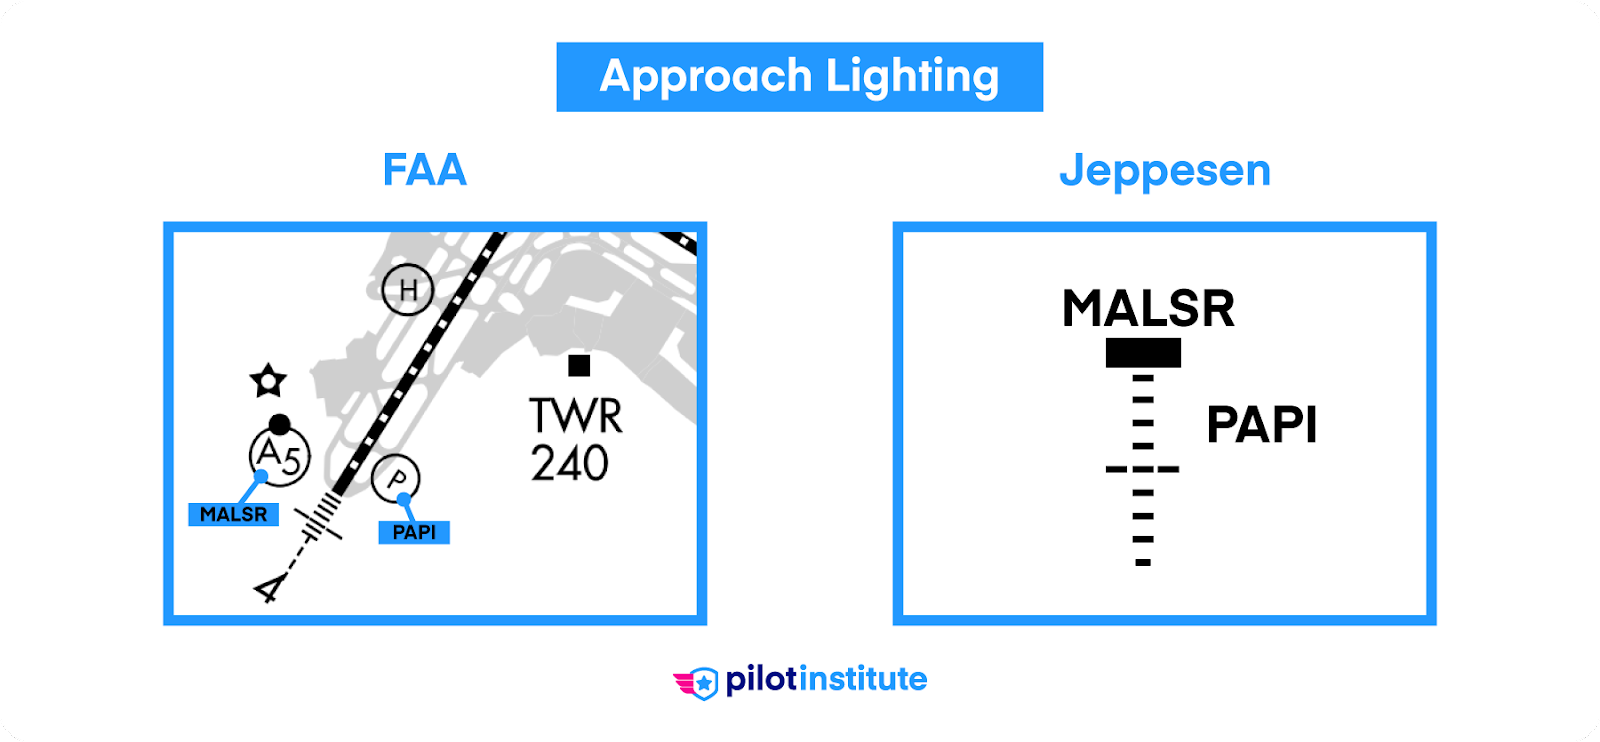 Approach lighting information from FAA and Jeppesen charts.